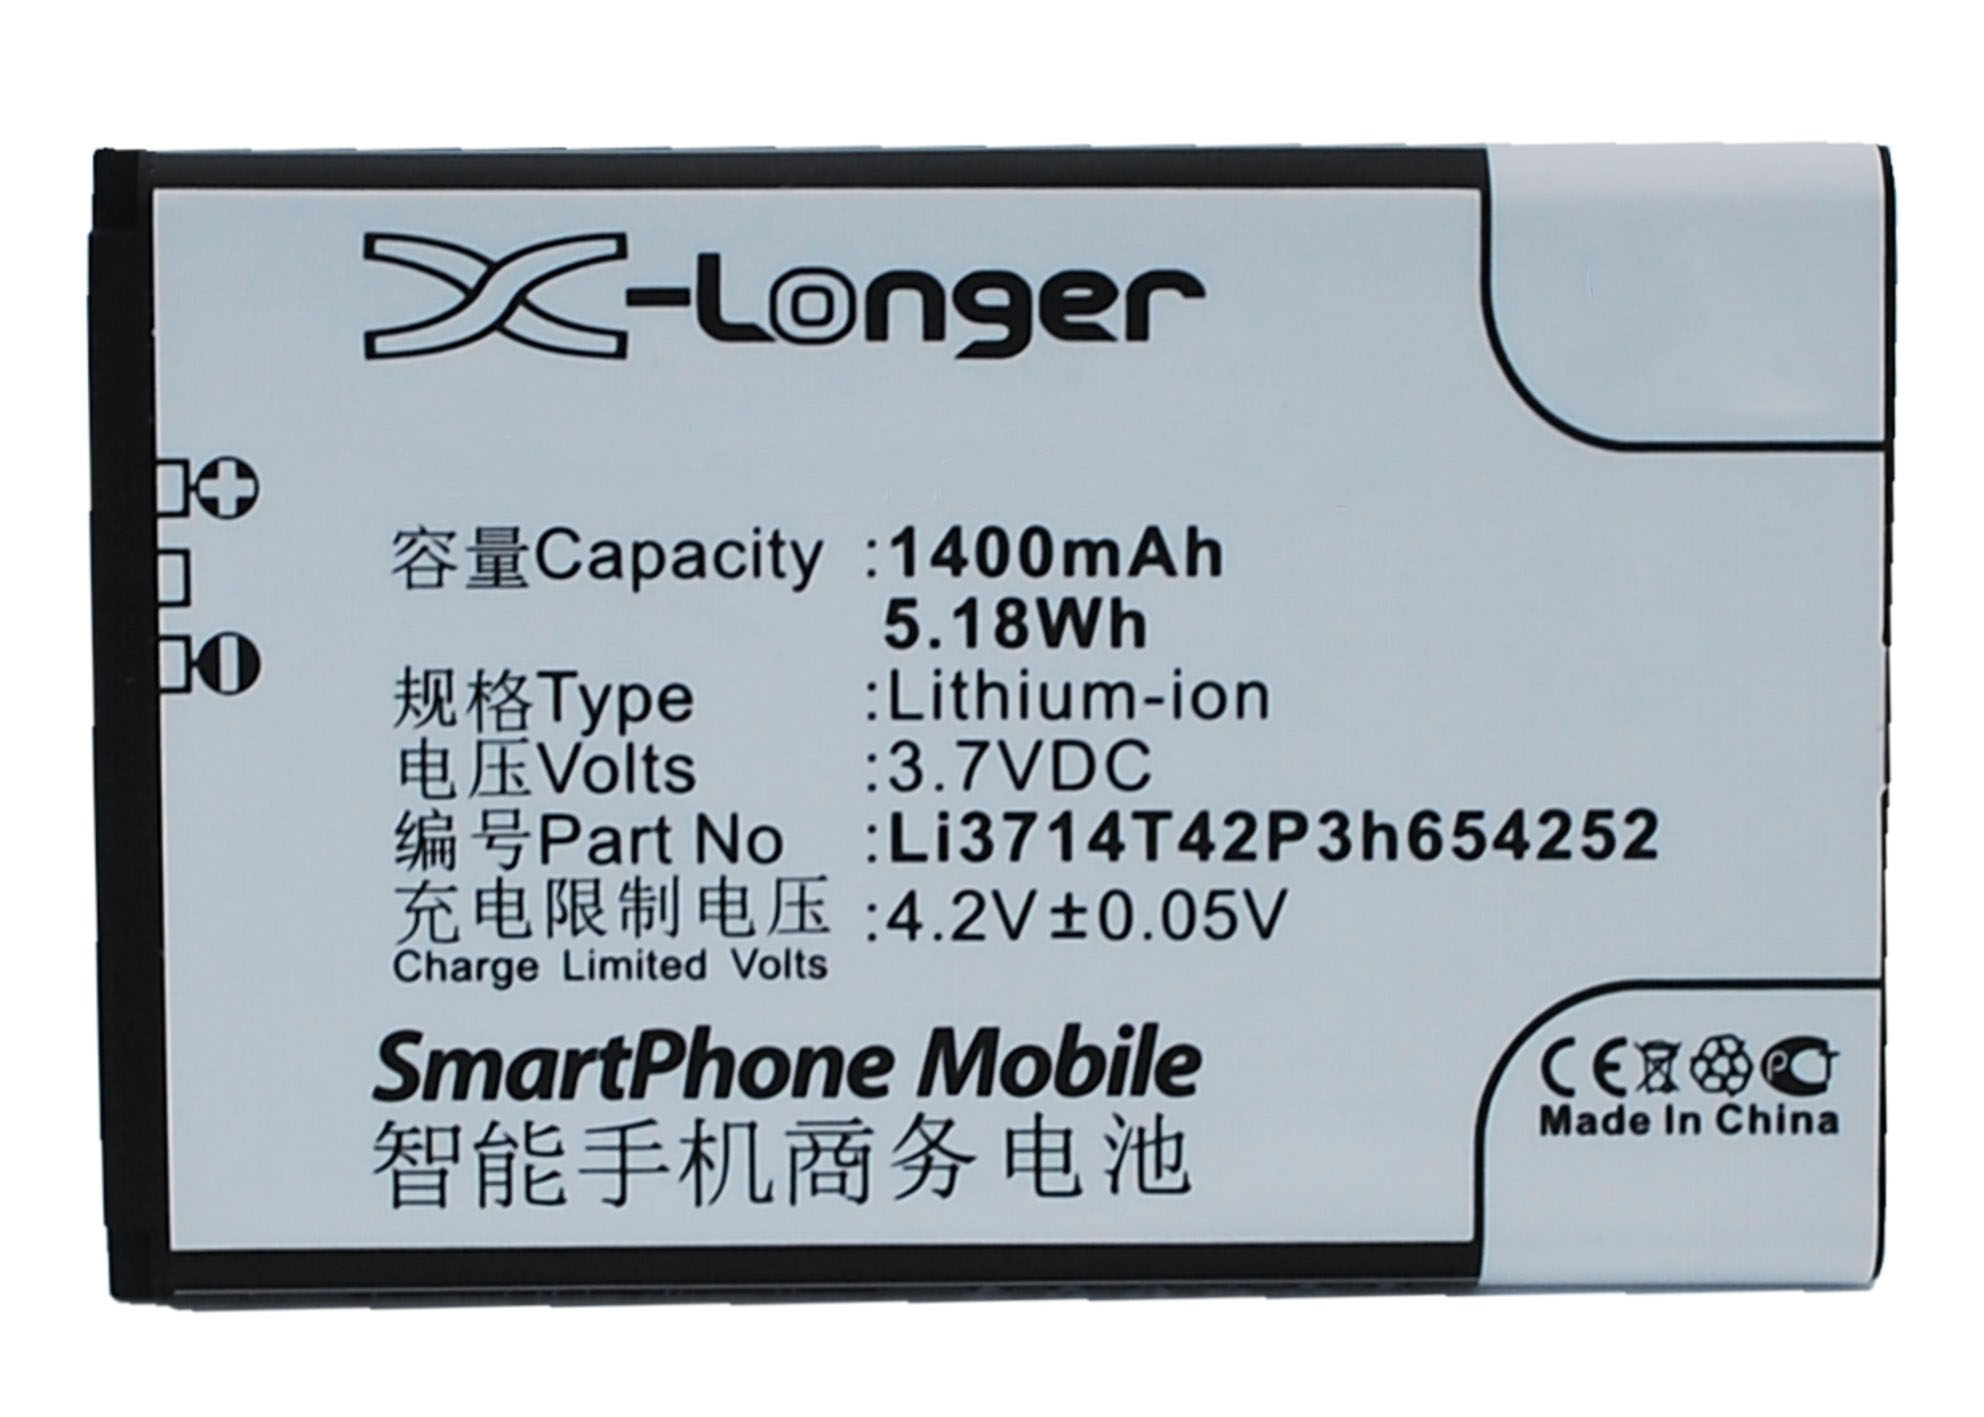 Synergy Digital Battery Compatible With ZTE Li3714T42P3h654252 Cellphone Battery - (Li-Ion, 3.7V, 1400 mAh / 5.18Wh)